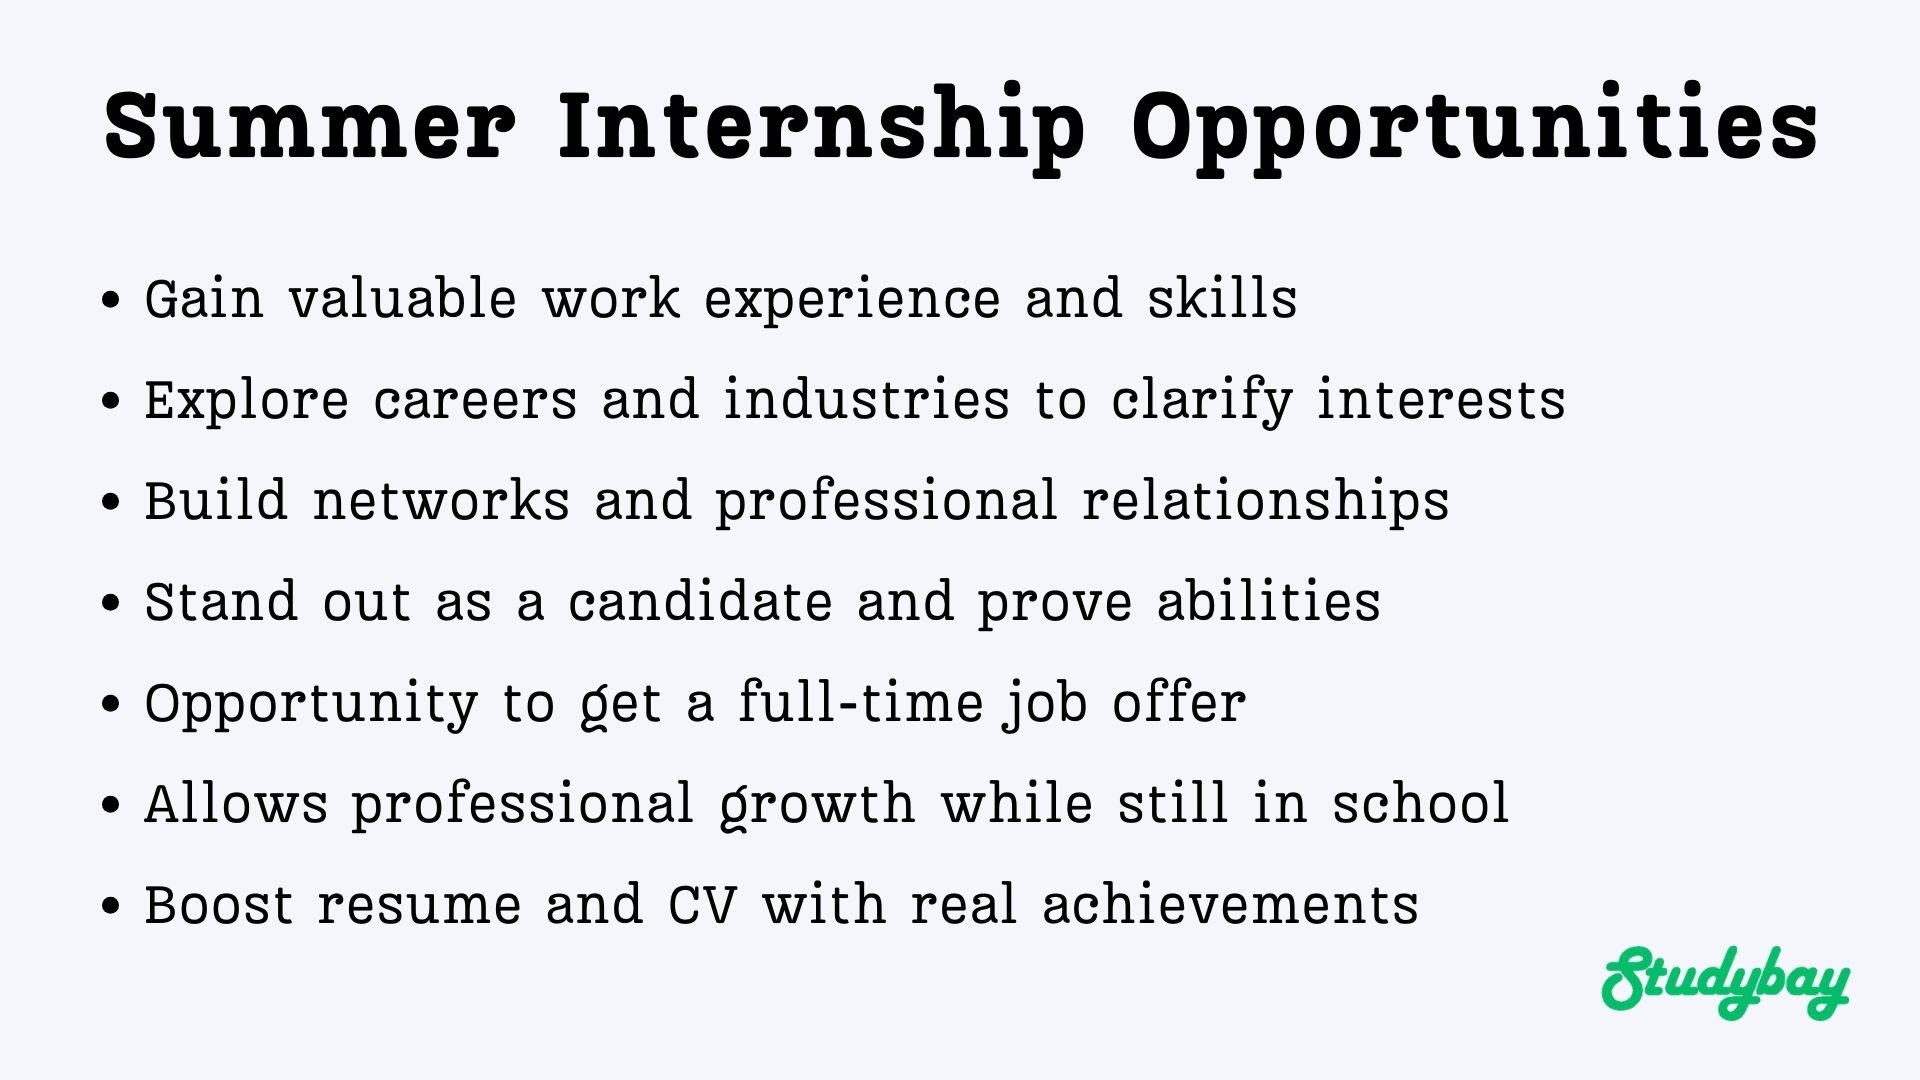 Learn When to Apply for Summer Internships